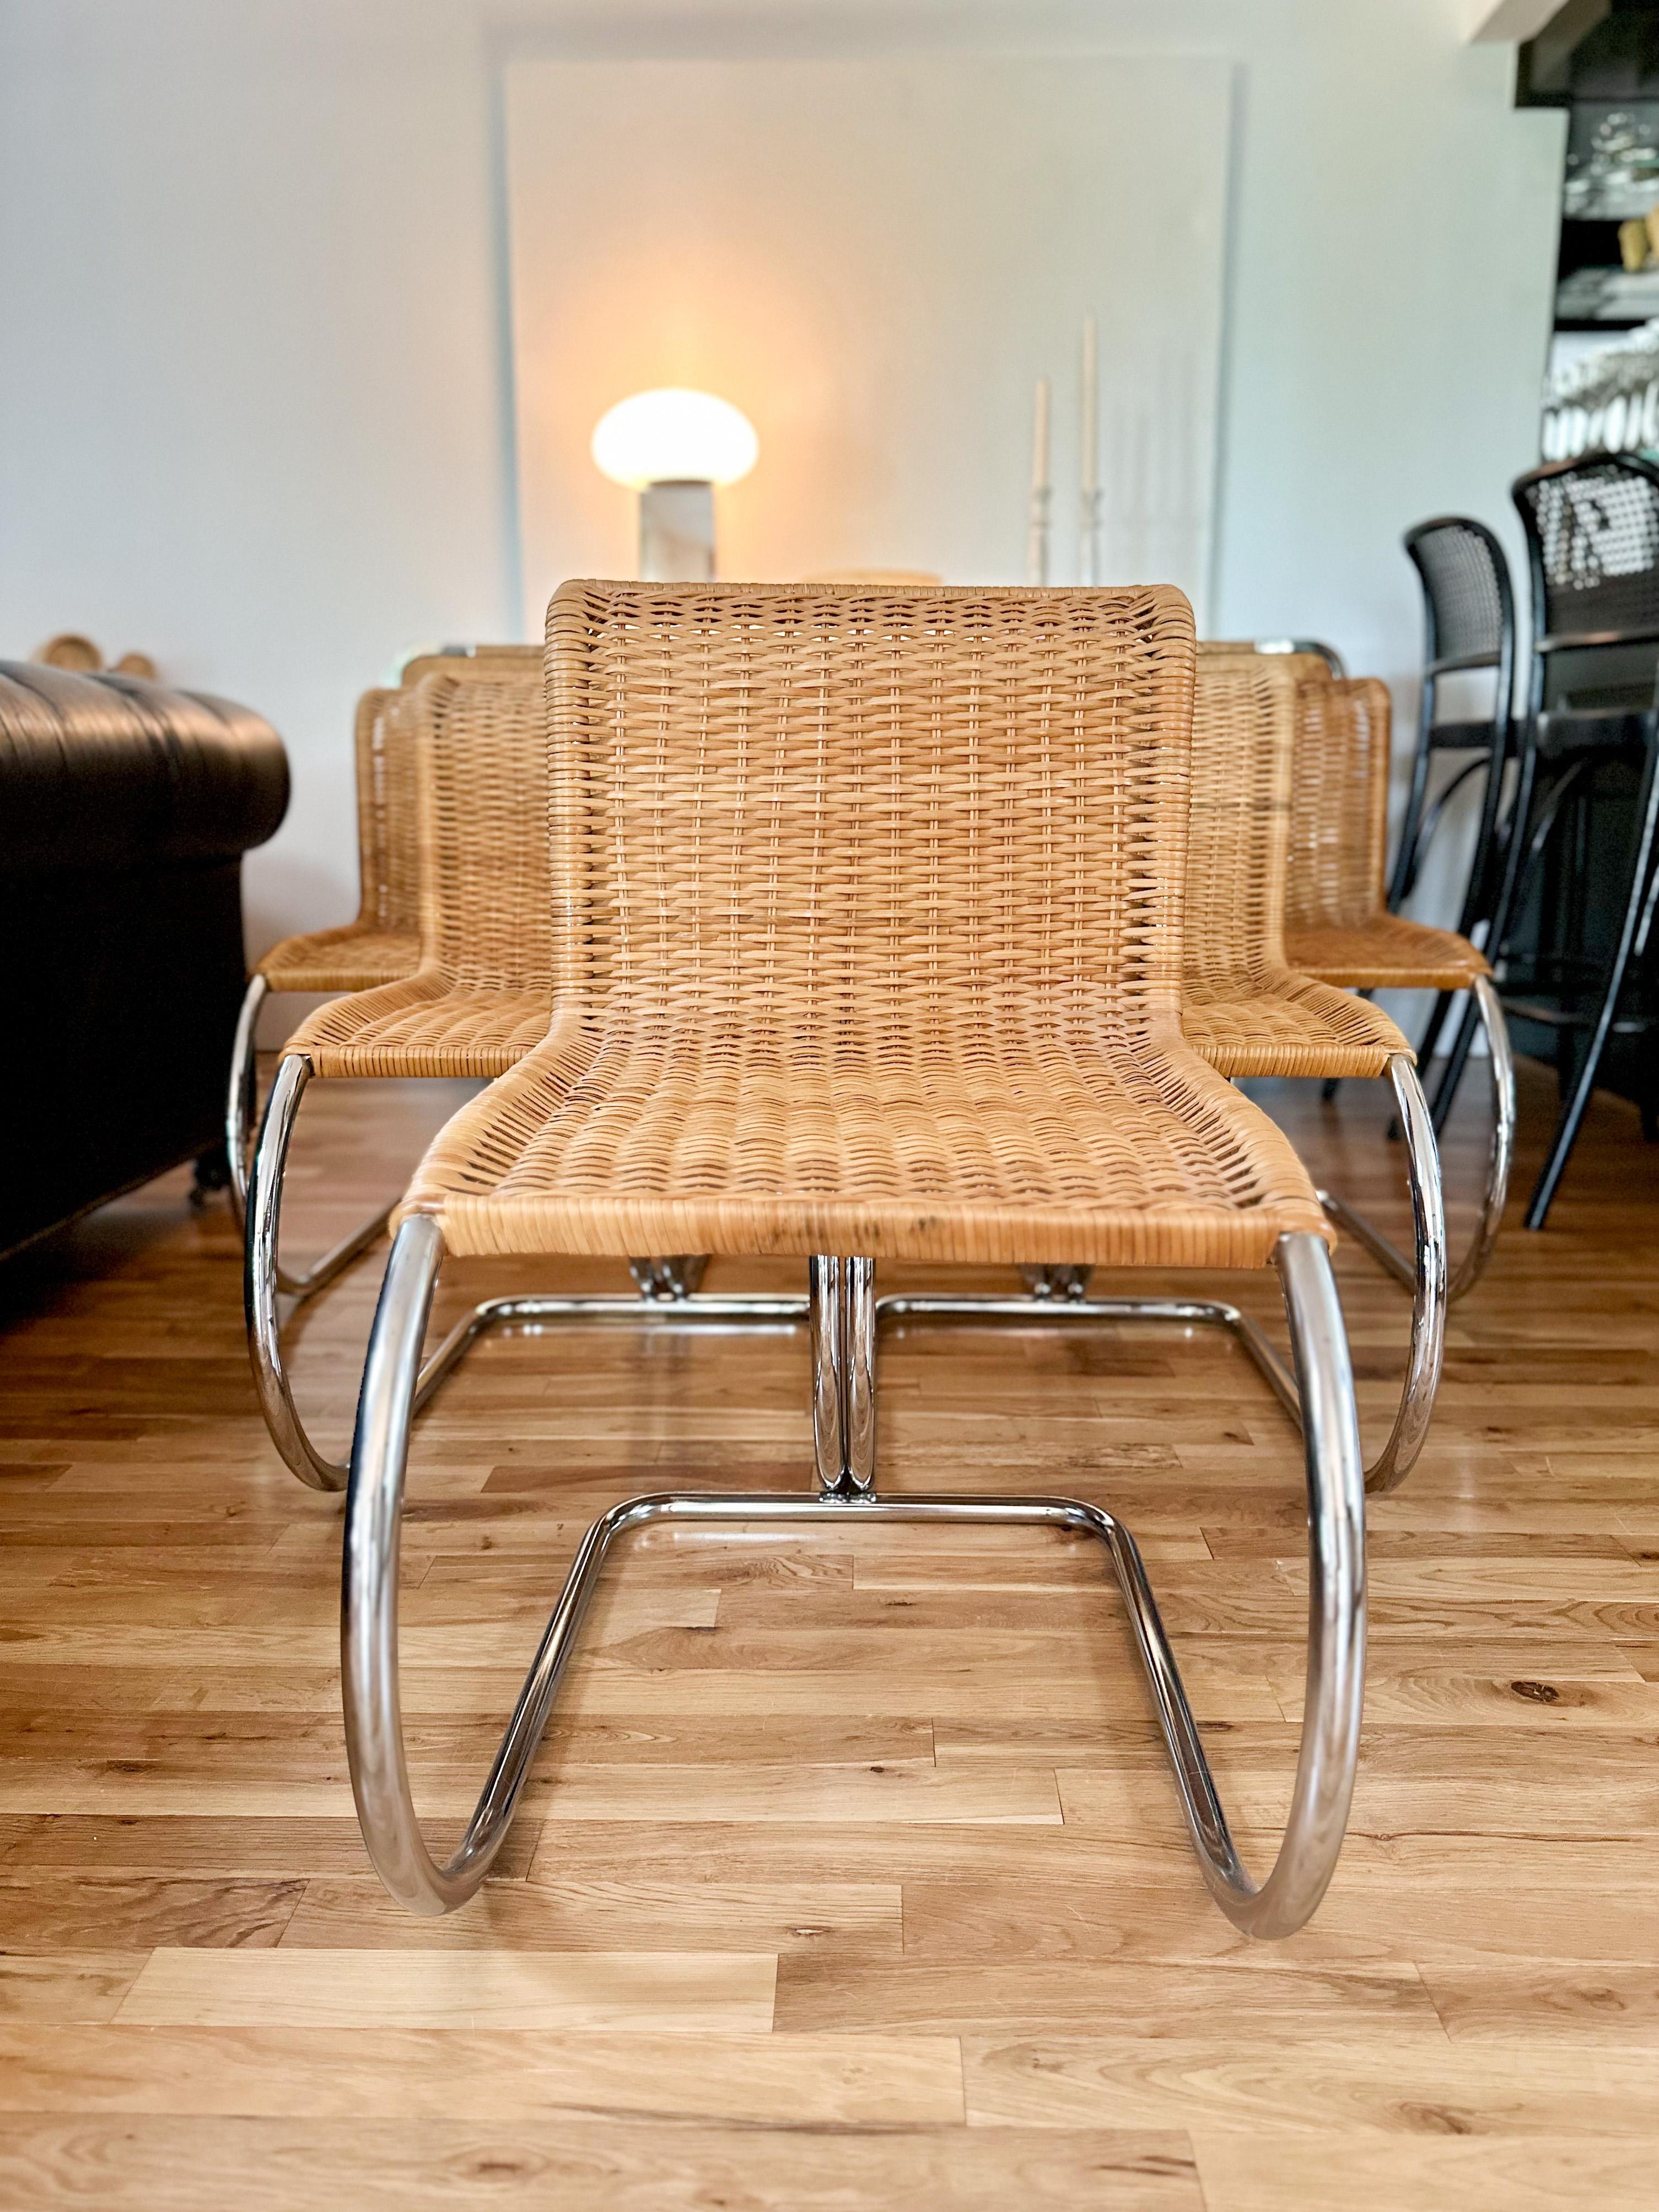 Fantastic and hard-to-find set of six 'MR10' rattan side chairs designed by Mies van Der Rohe for Knoll, c.1970s. These Bauhaus icons were first designed by renowned architect Ludwig Mies van der Rohe in Germany in 1927, a true testament to the